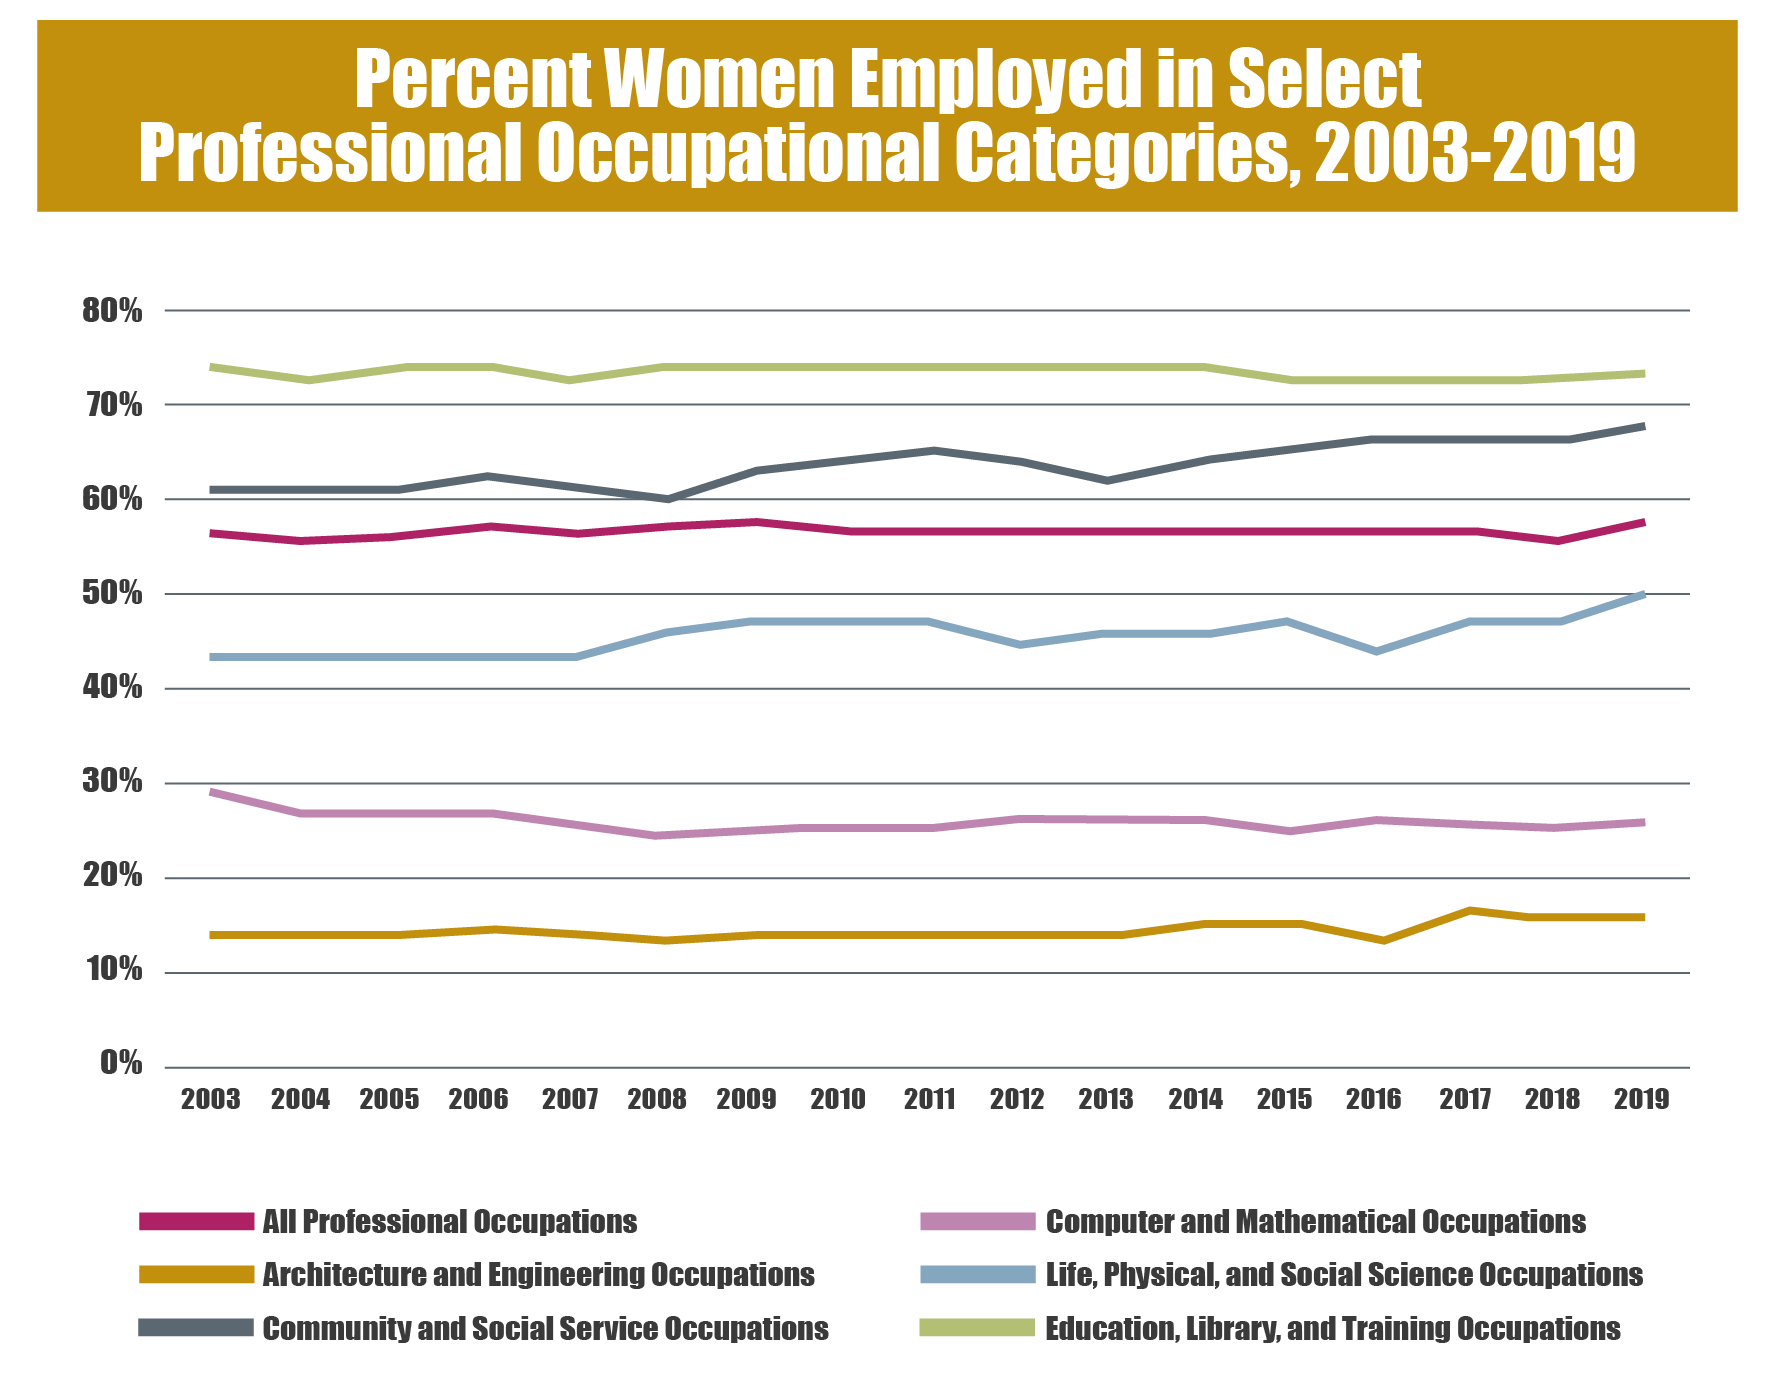 A graph showing the percentage of women employed in different occupational categories from 2003 to 2019.